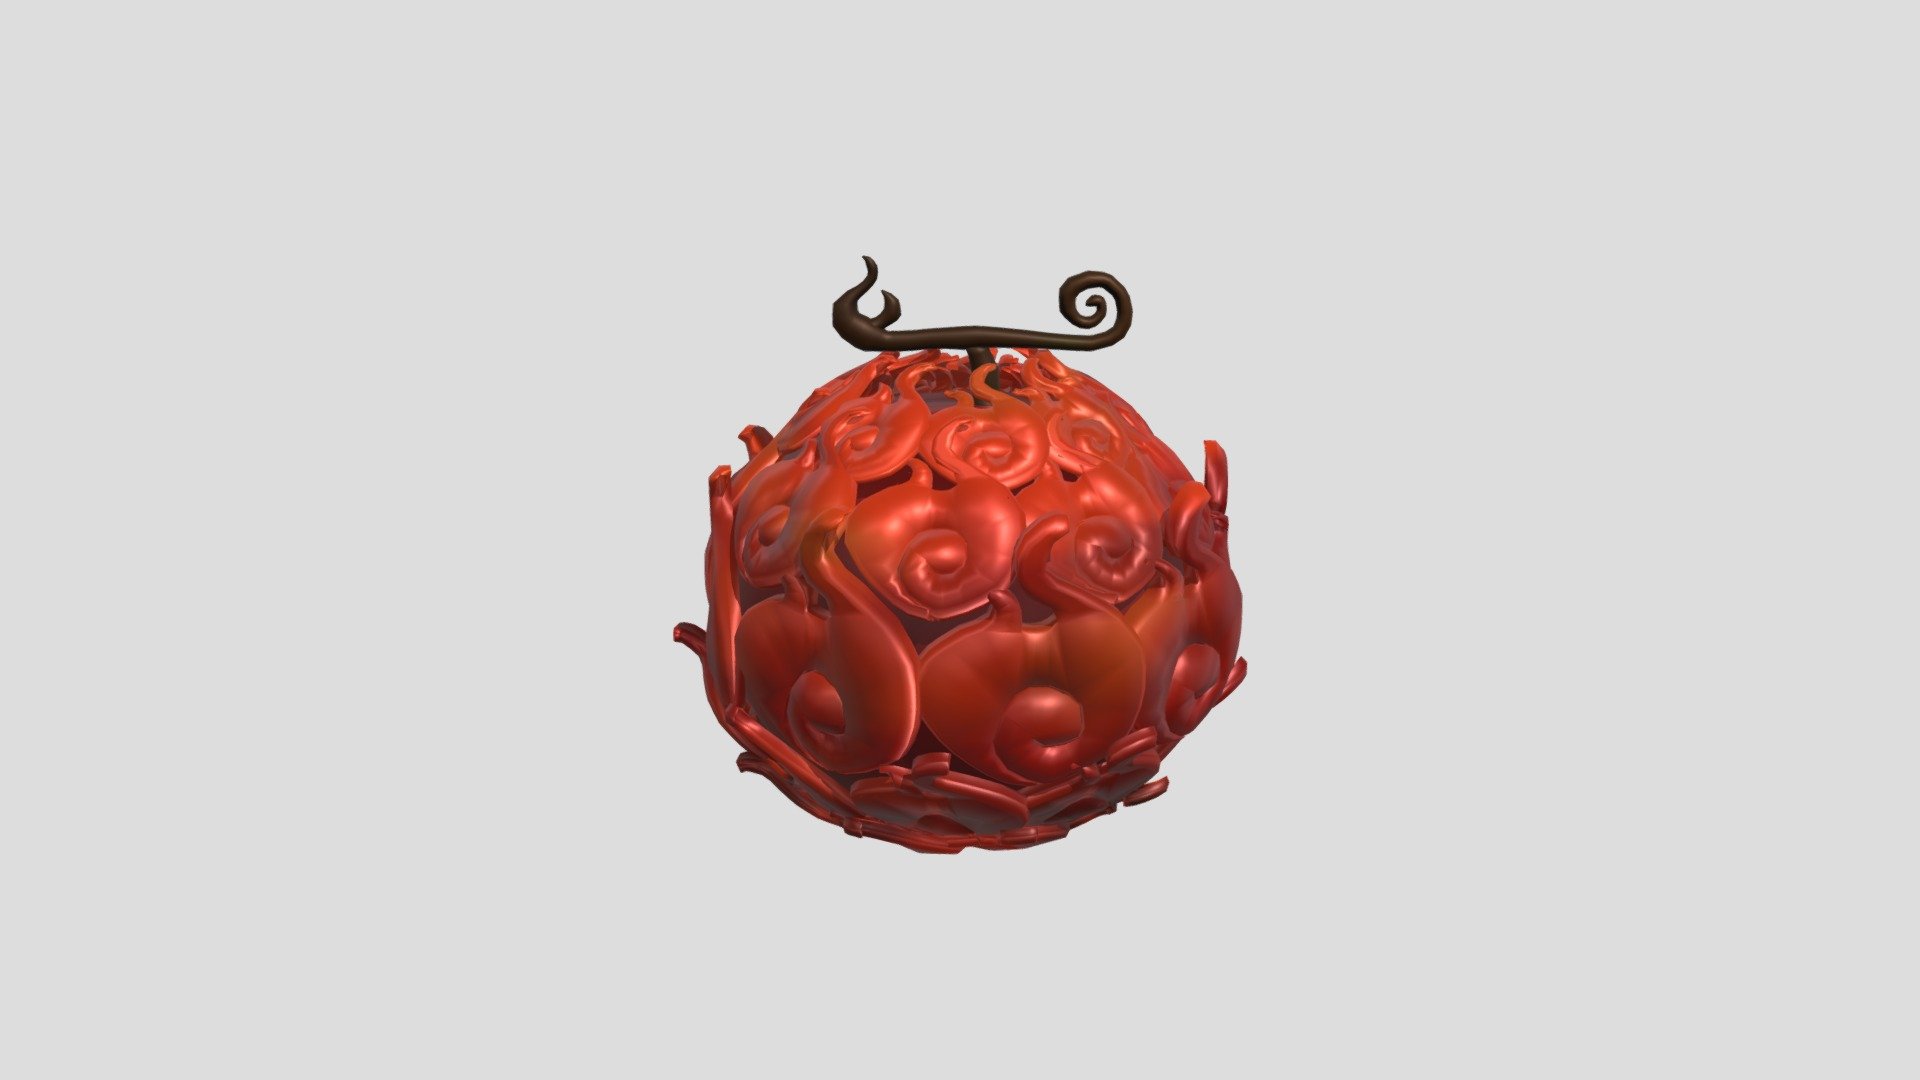 Mera Mera no Mi Devil Fruit from One Piece
Made with blender
All rights go to Toei animation and Eiichiro Oda, this is simply fan-made content
FEEL FREE TO USE THIS IN PROJECTS JUST CREDIT ME (Credit matty_lmao) - Mera Mera no Mi - One Piece - Download Free 3D model by Matty_lmao 3d model